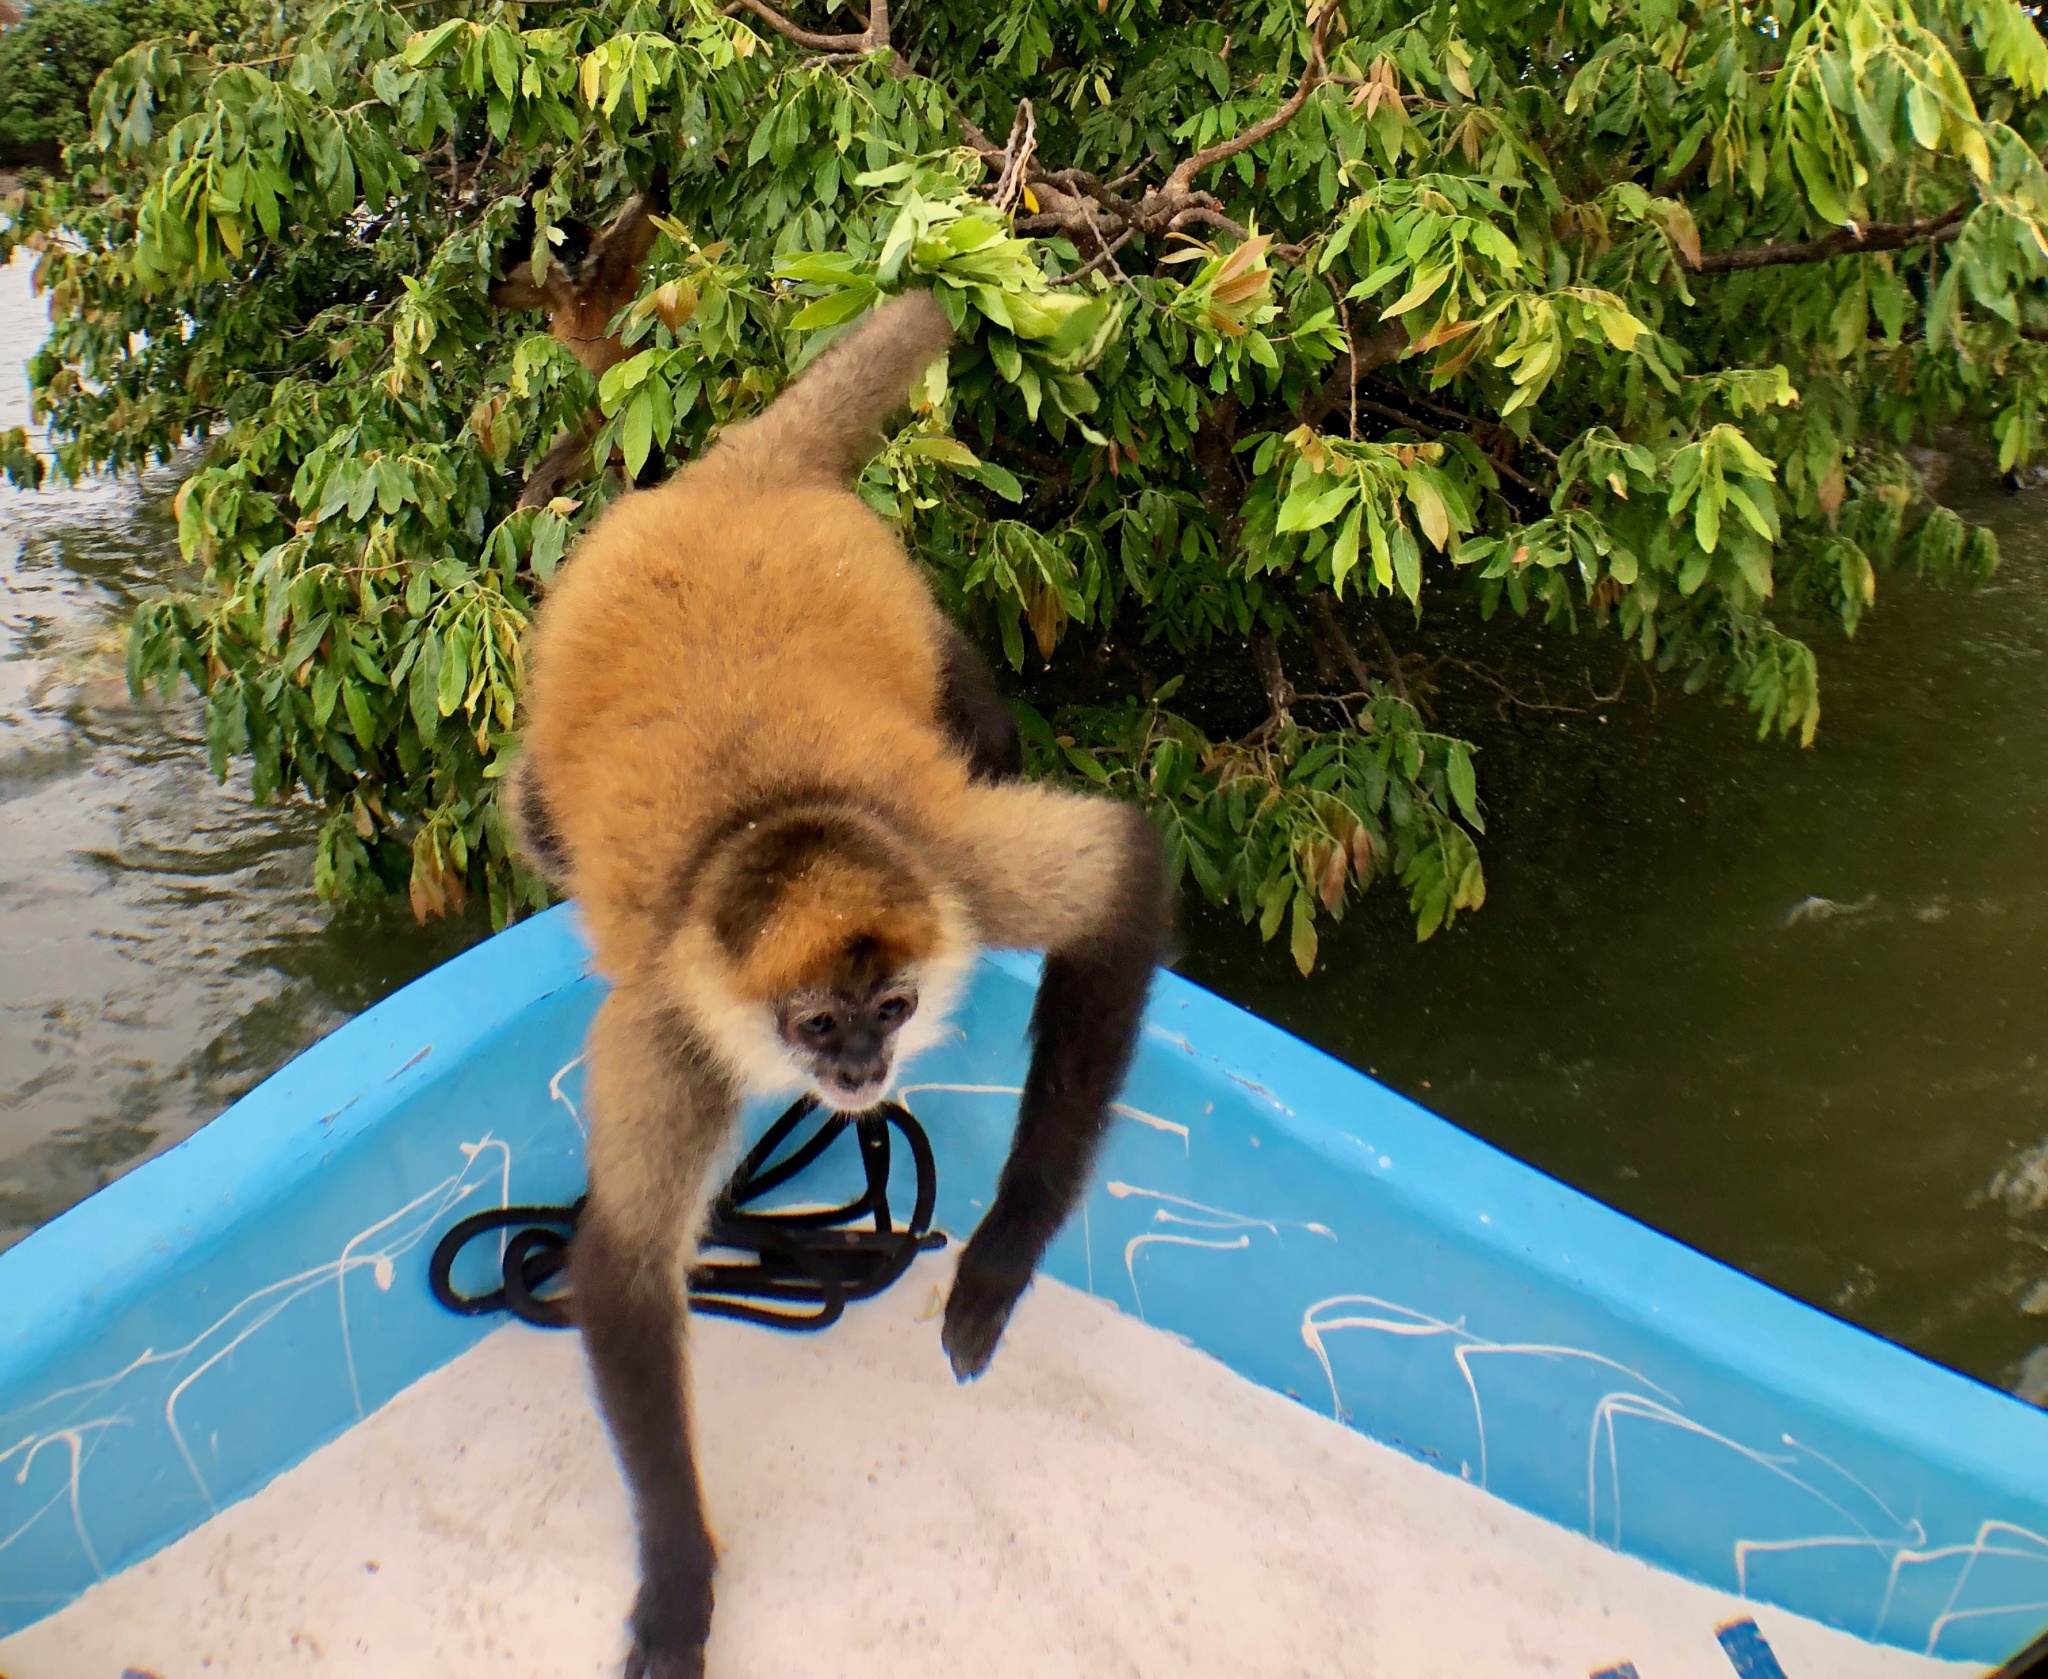 Monkey jumping onto our boat during boat tour of Lake Nicaragua